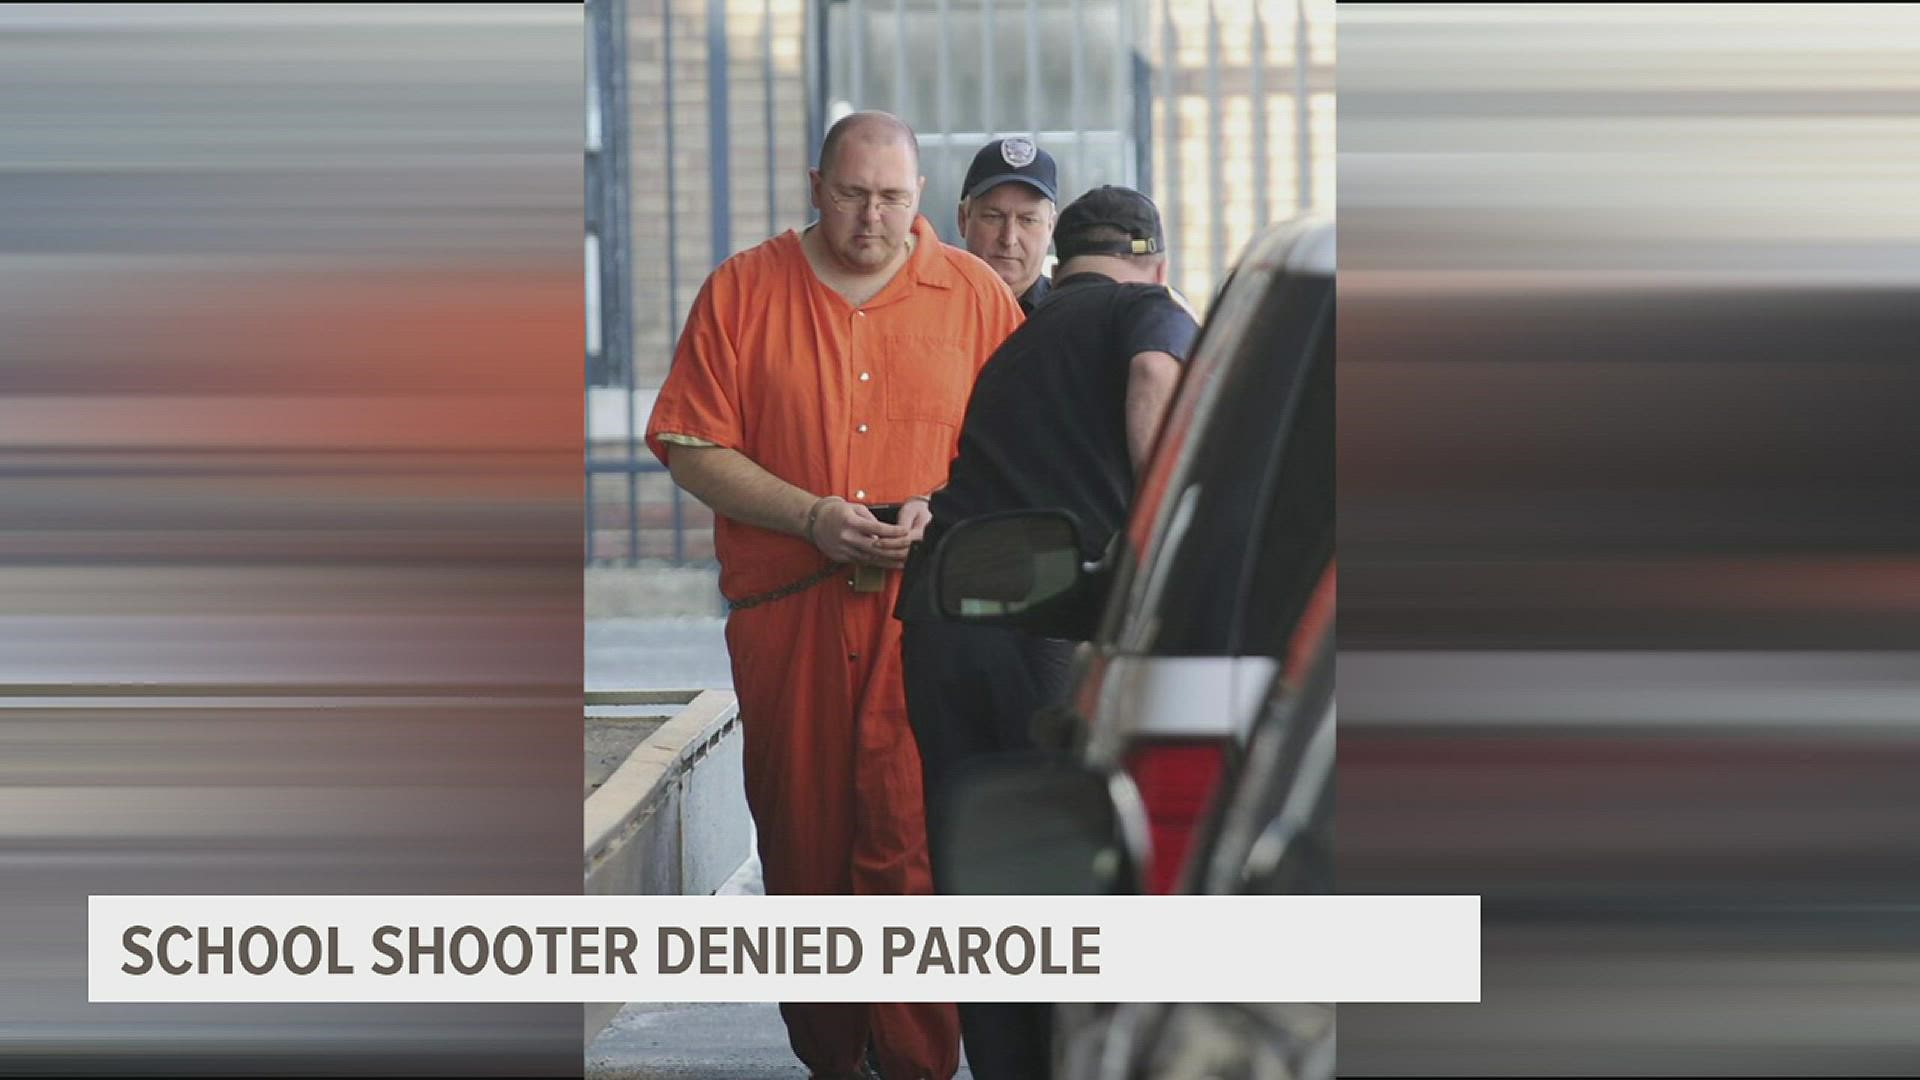 The Kentucky Parole Board voted Monday to deny parole to 39-year-old Michael Carneal, and ordered him to serve out his full life sentence.